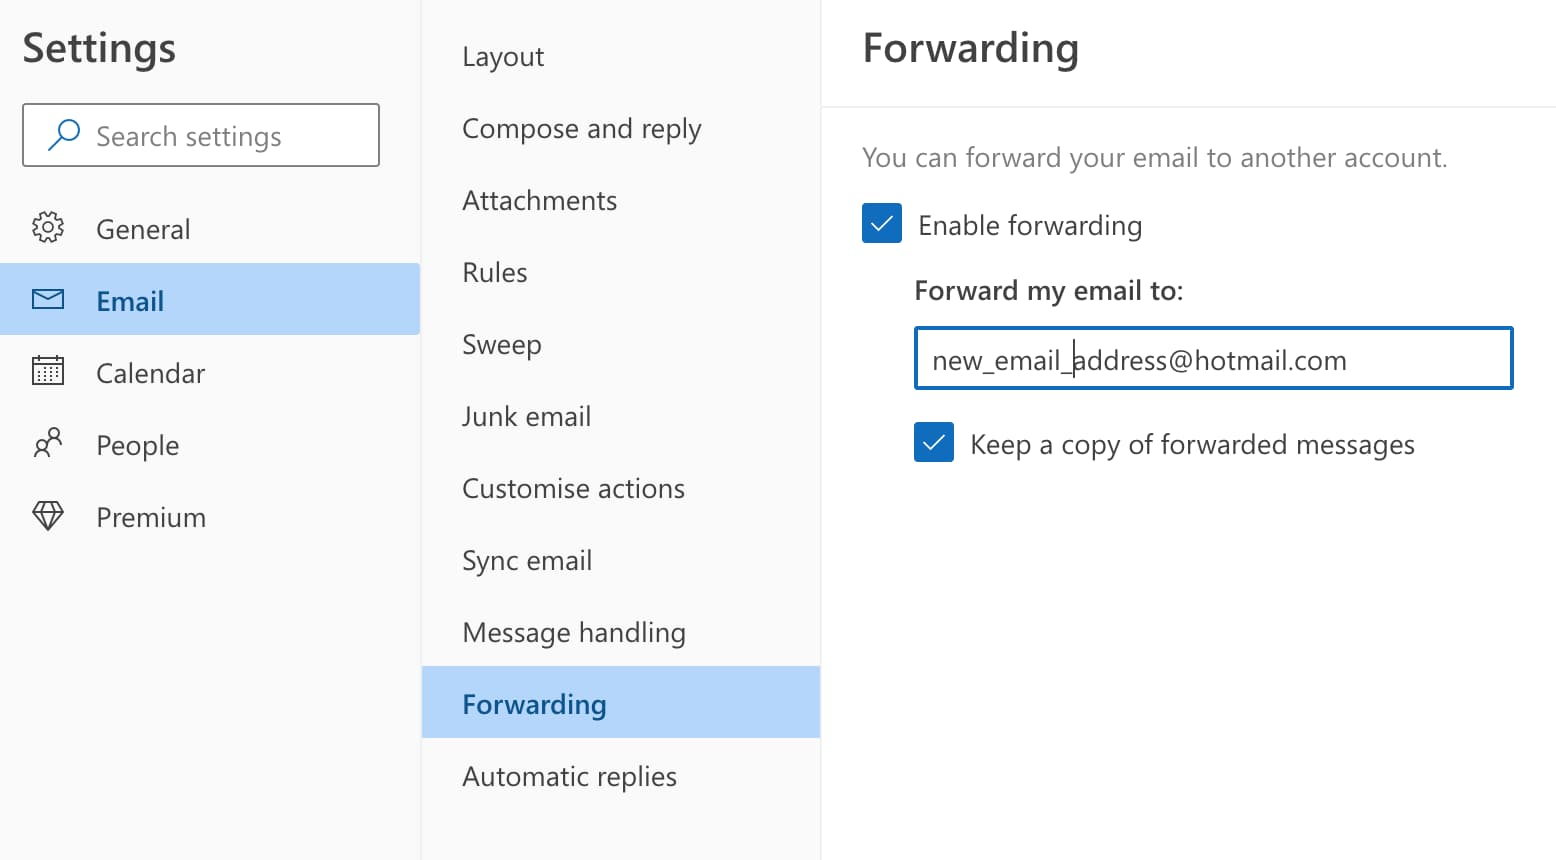 The menu for setting up forwarding rules in Hotmail